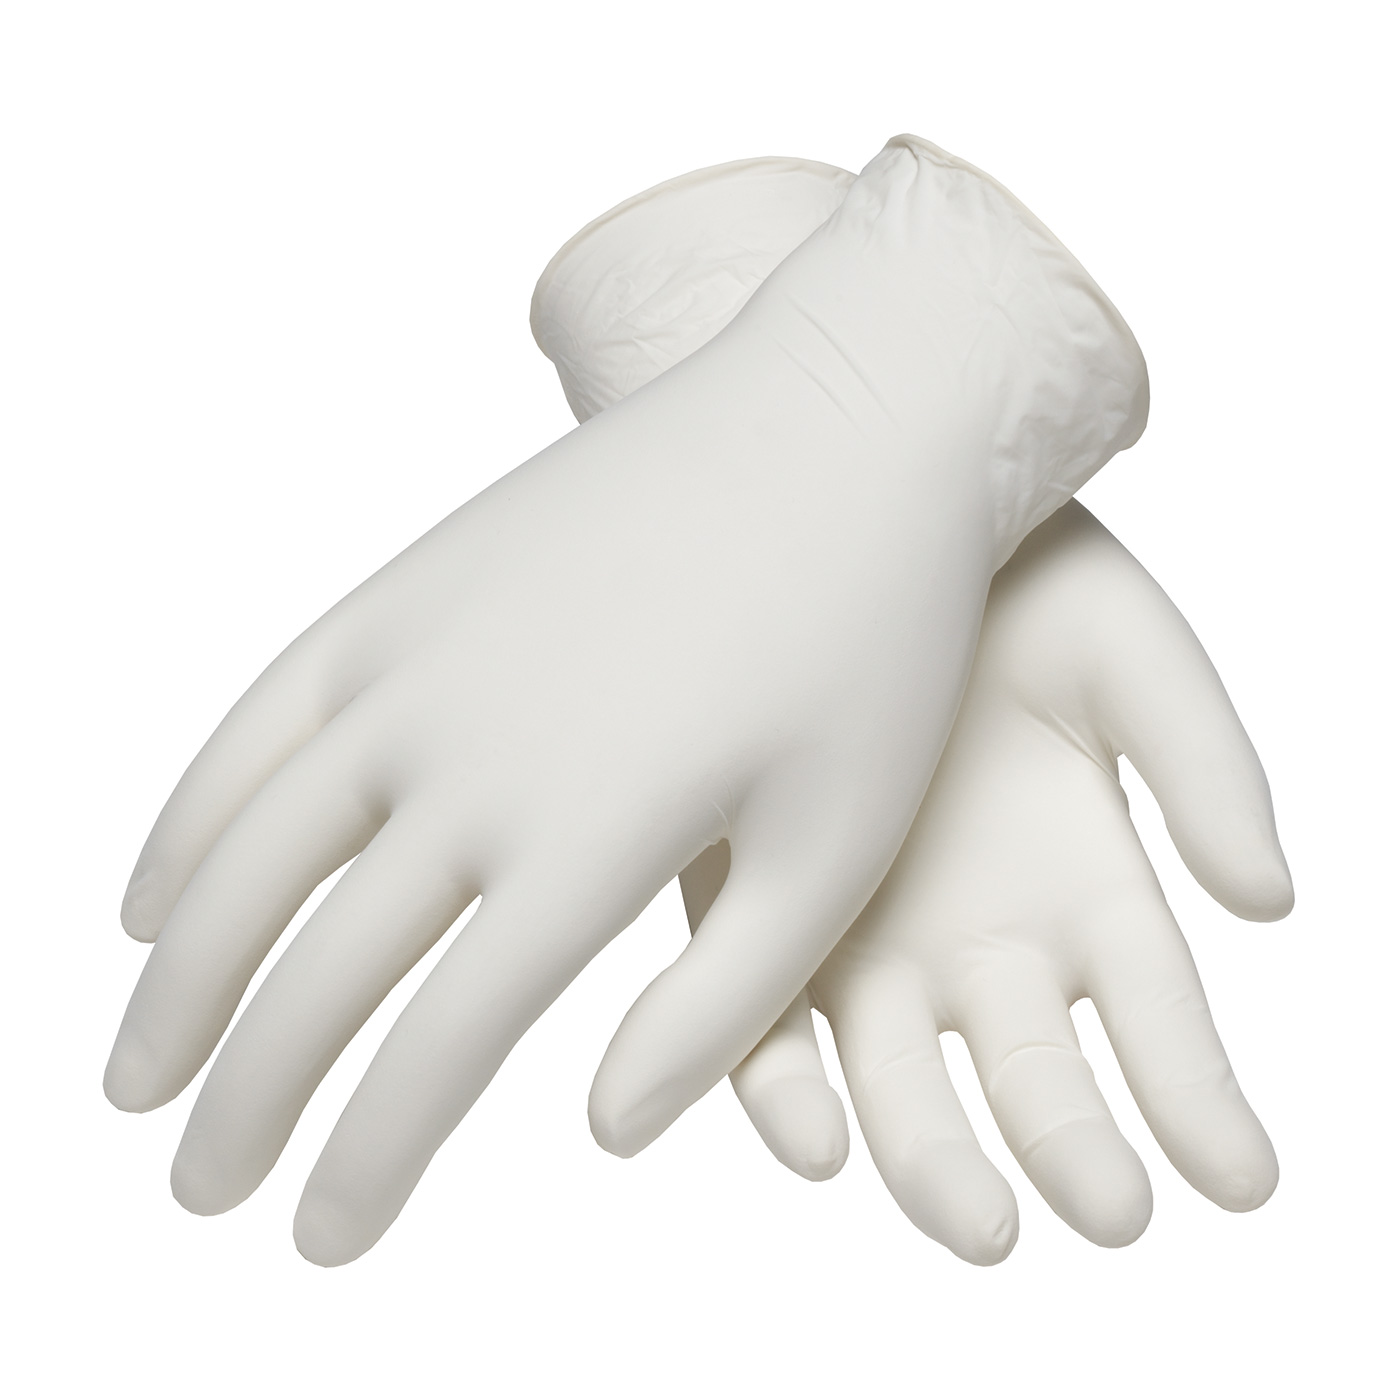 Ambi-dex Food Grade Disposable Latex Free Glove - 64-346 - 50 Pairs from GME Supply